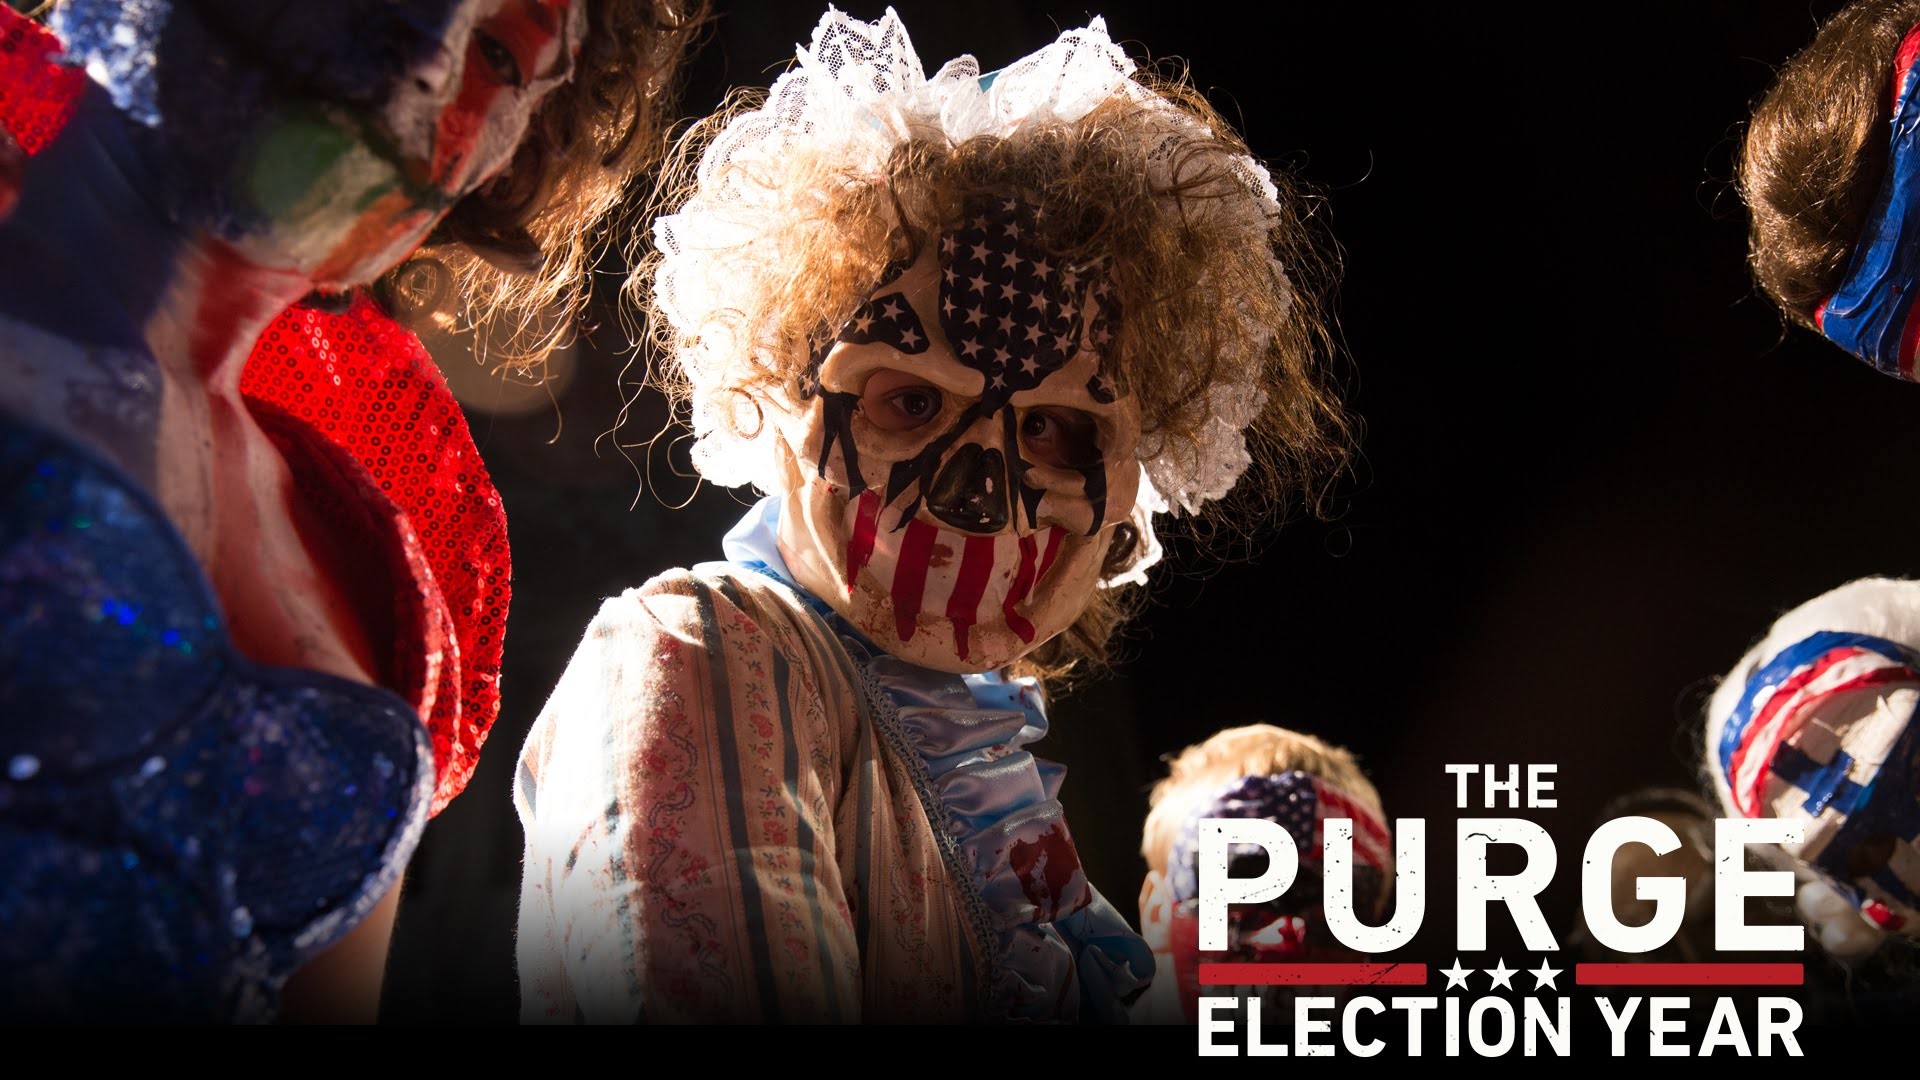 1920x1080 The Purge Election Year 2016 (2048x1152 Resolution)